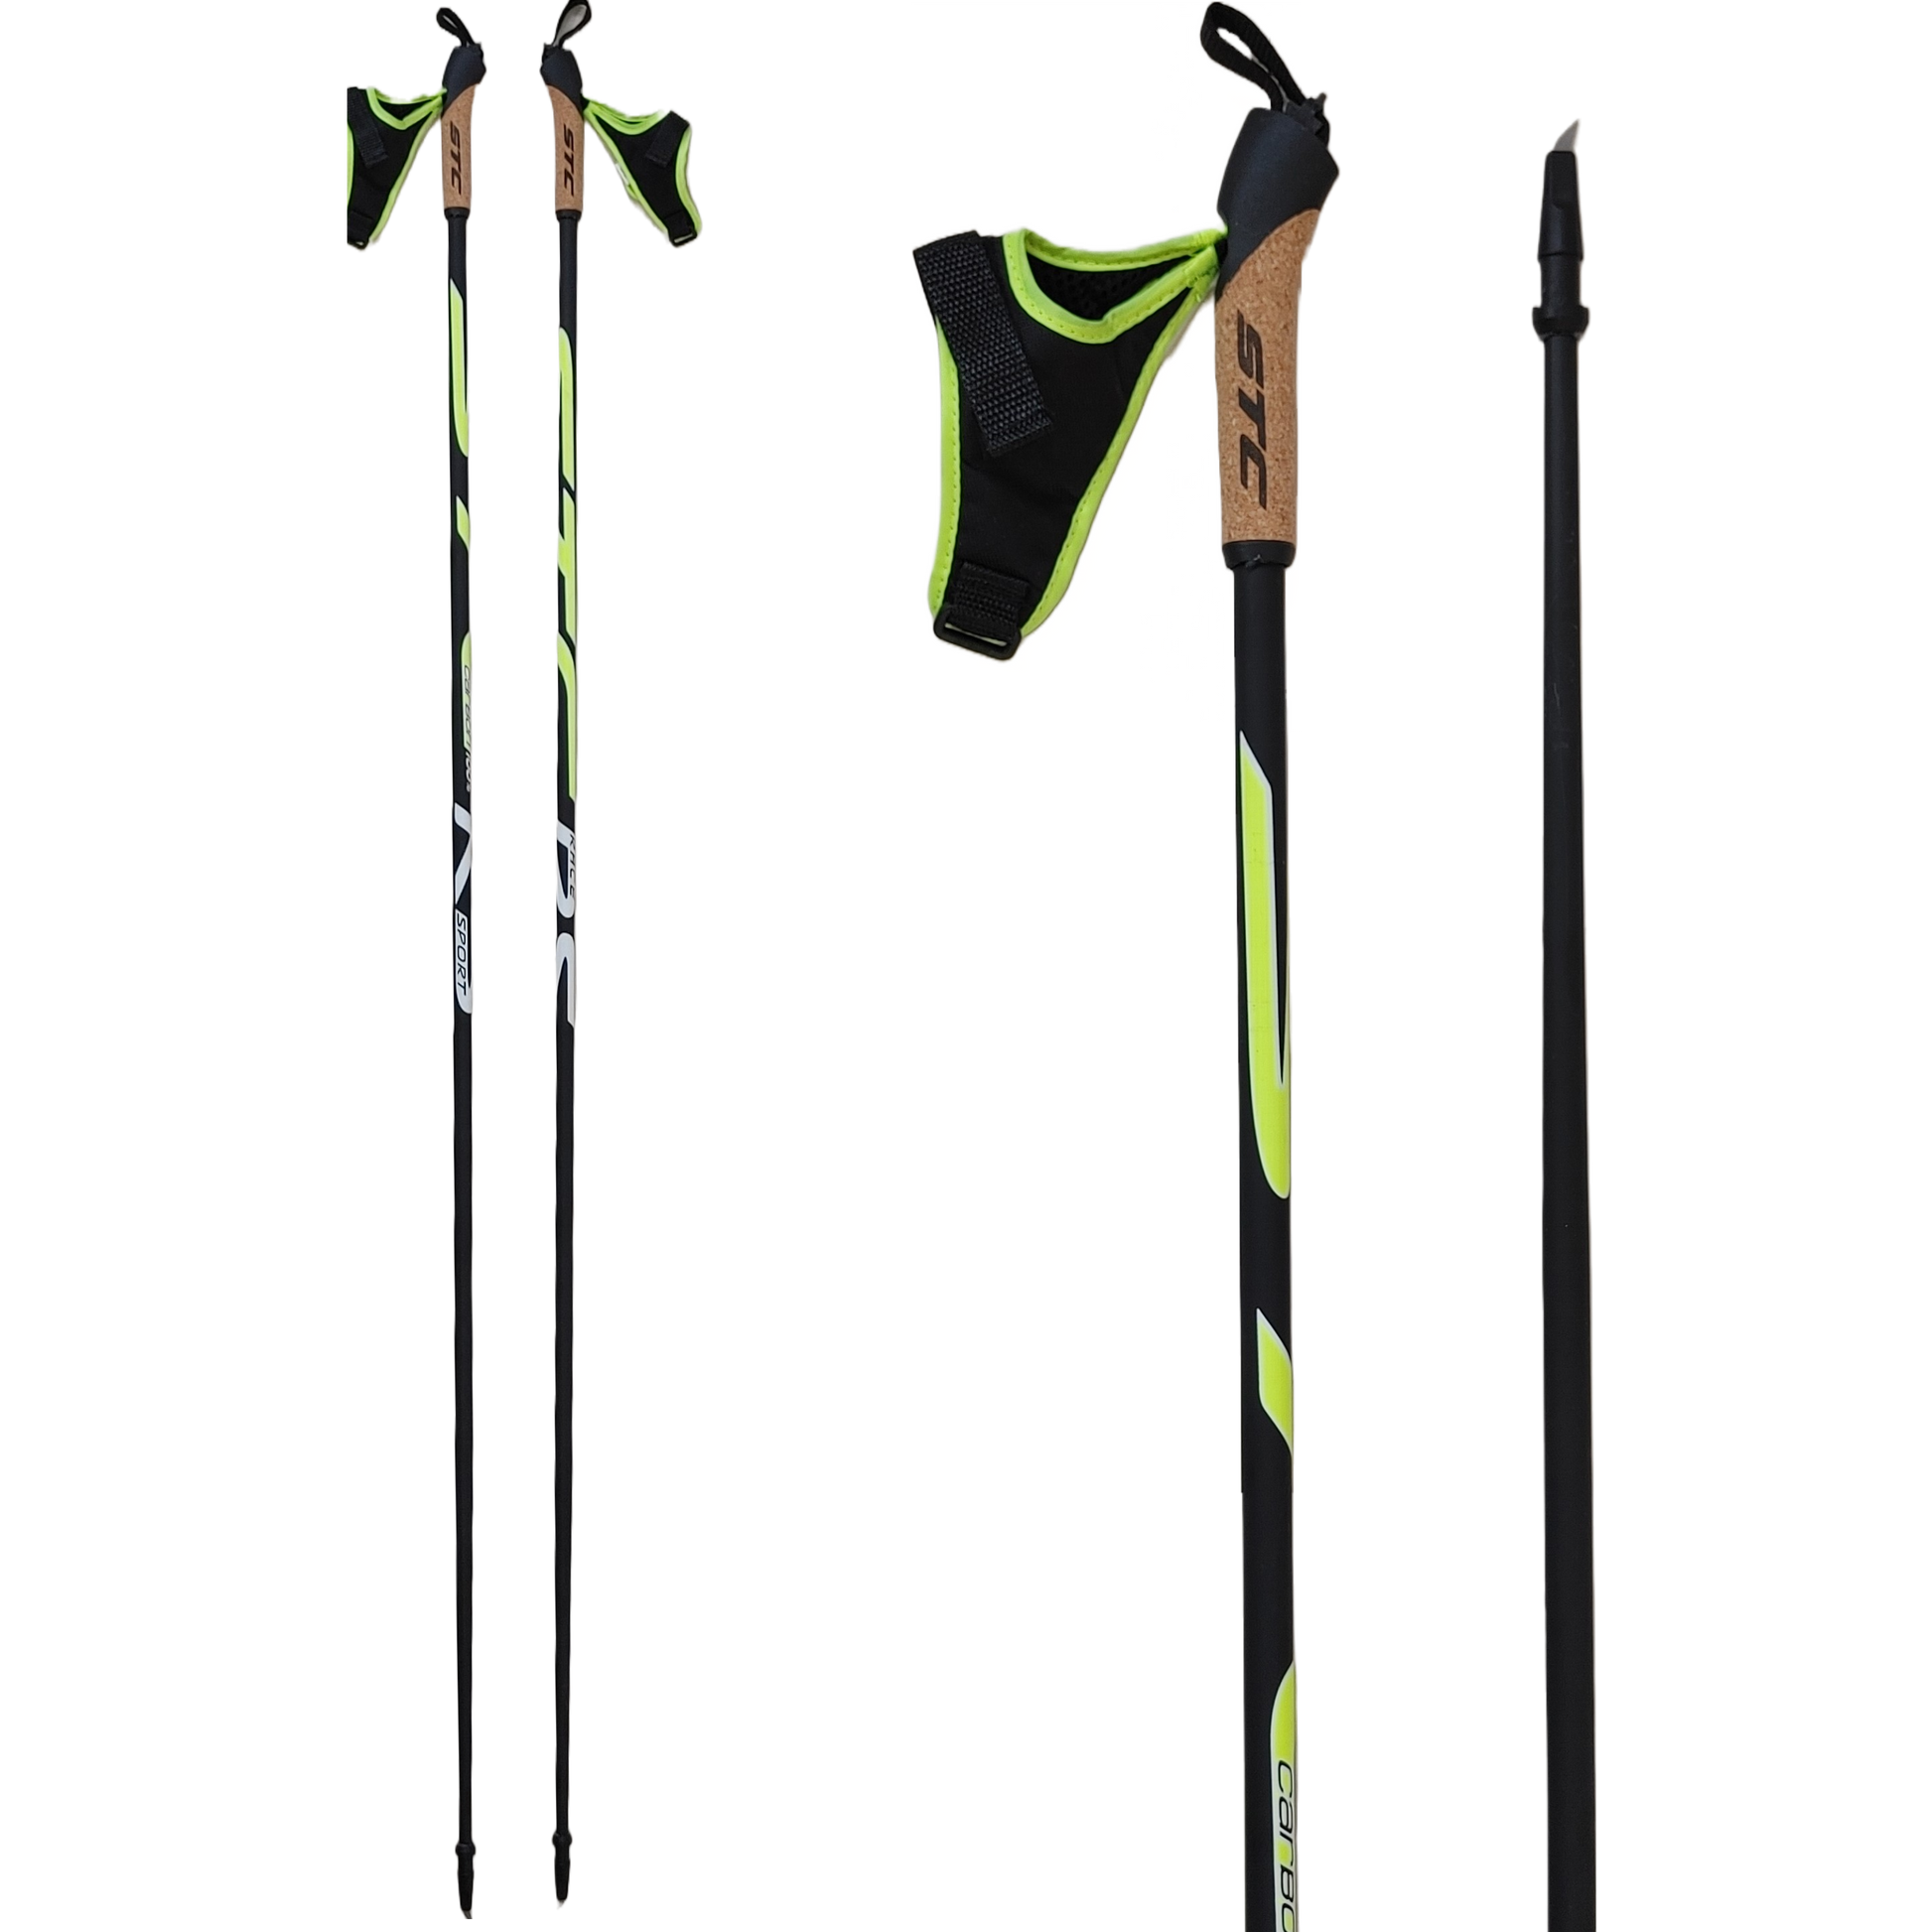 STC RS 100% Carbon Rollerski Poles